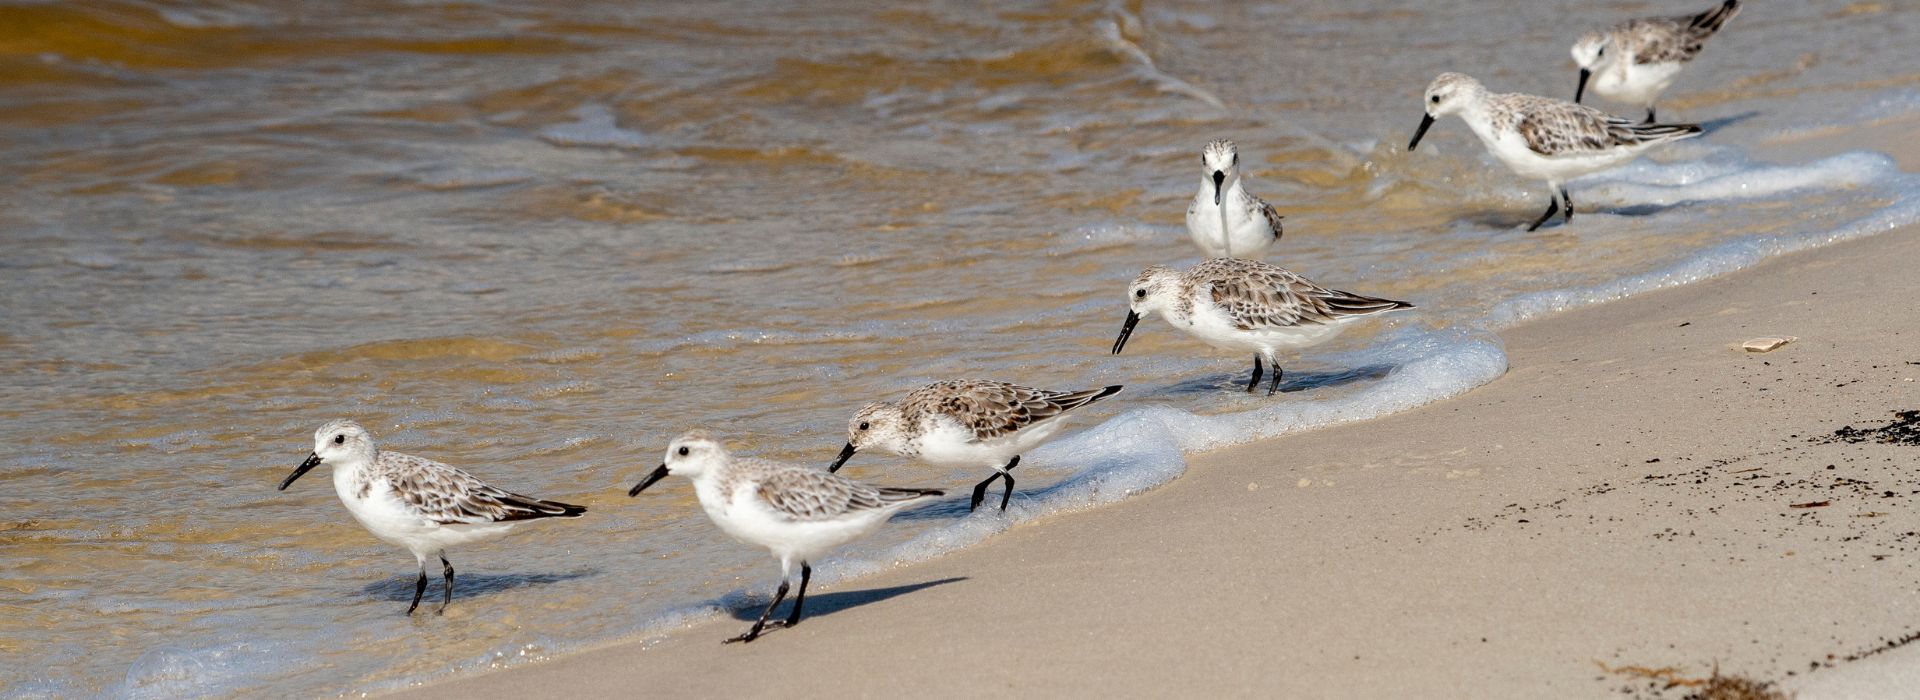 Semipalmated Sandpiper birds at the surf along the beach